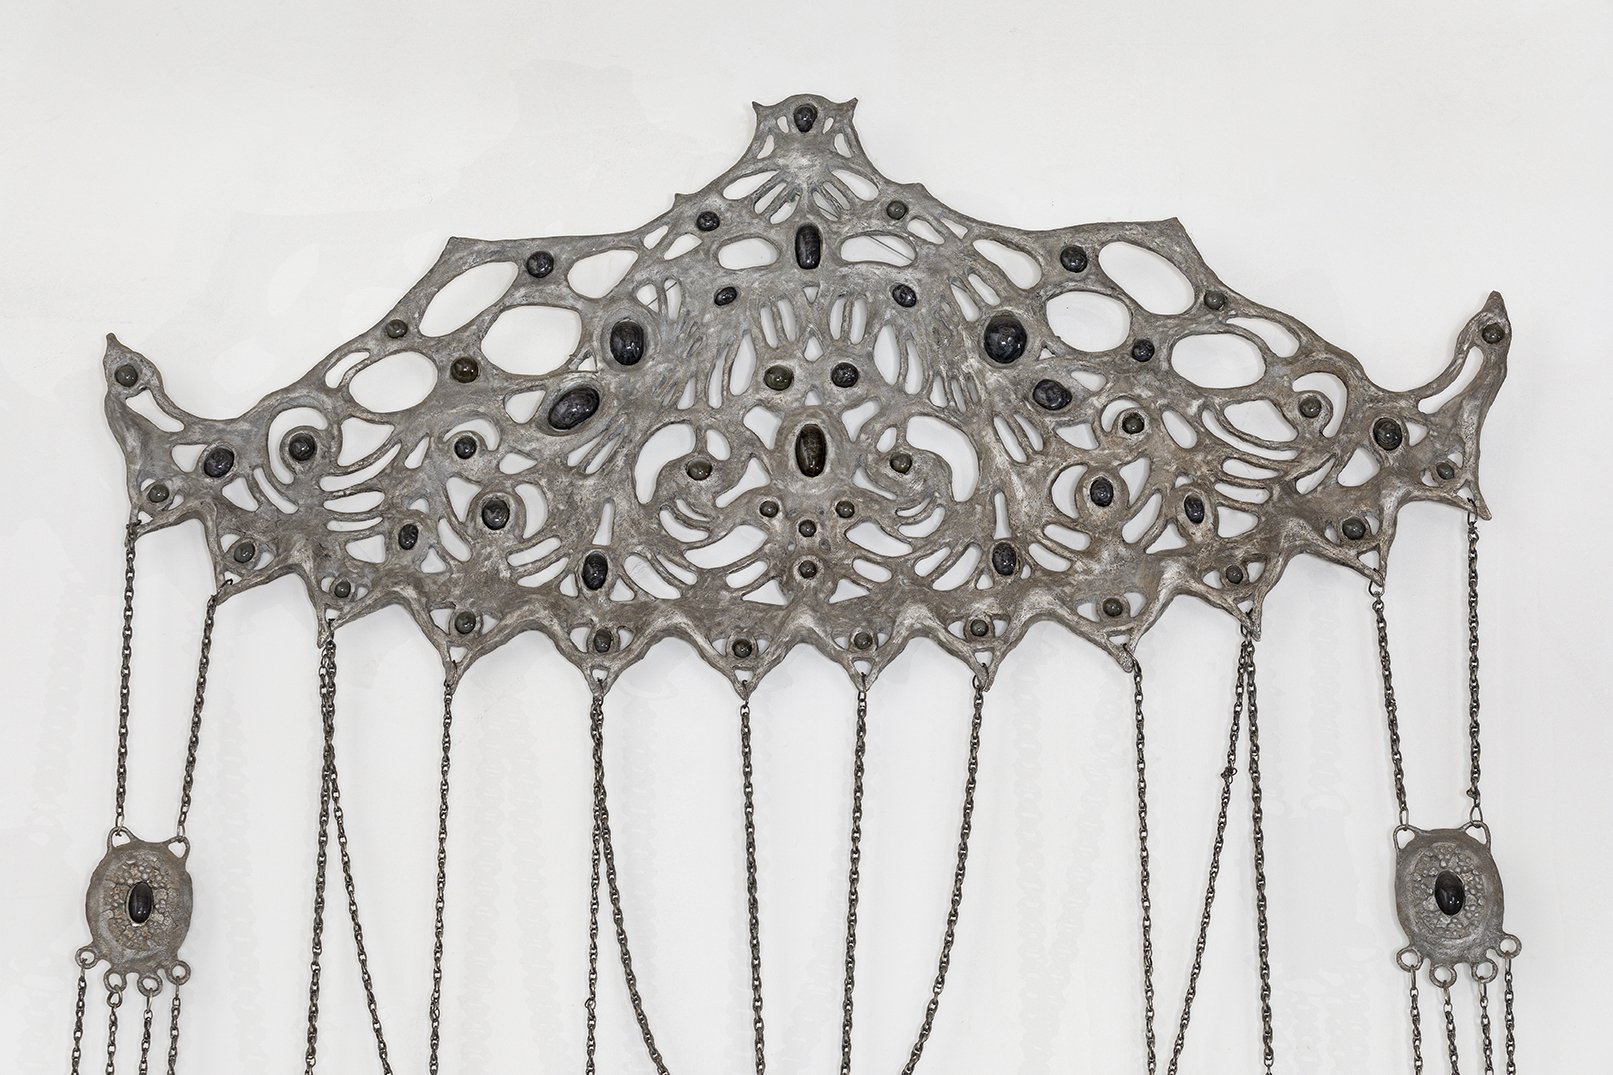  Marsha Pels,  Chatelaine of Eviction  (detail), 2013-2015. Patined cast aluminum, flame-worked glass, pewter chains. 120 x 60 x 2 inches. 